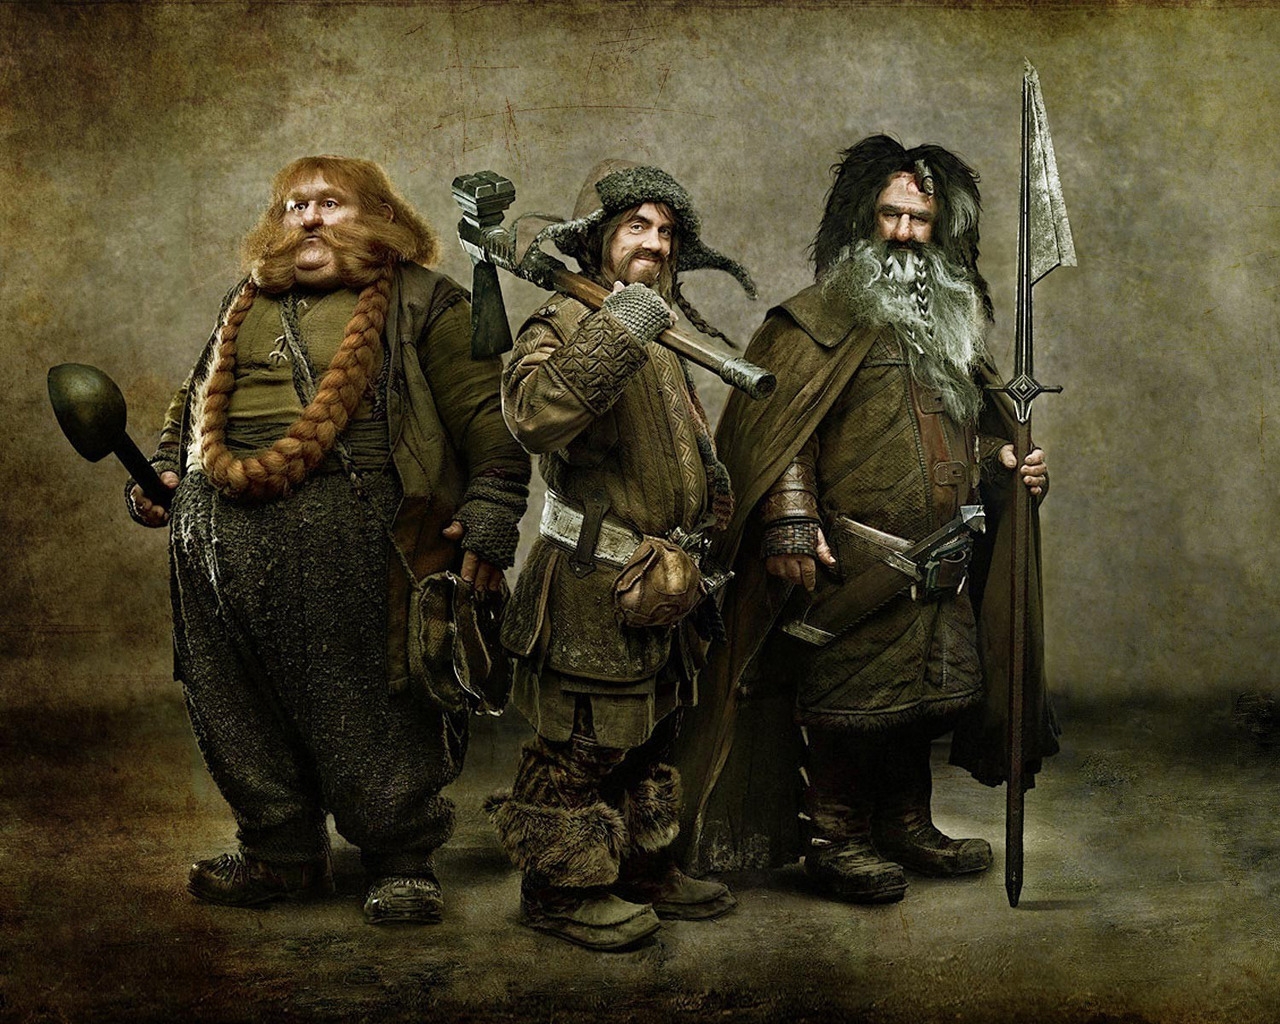 The Hobbit Characters for 1280 x 1024 resolution